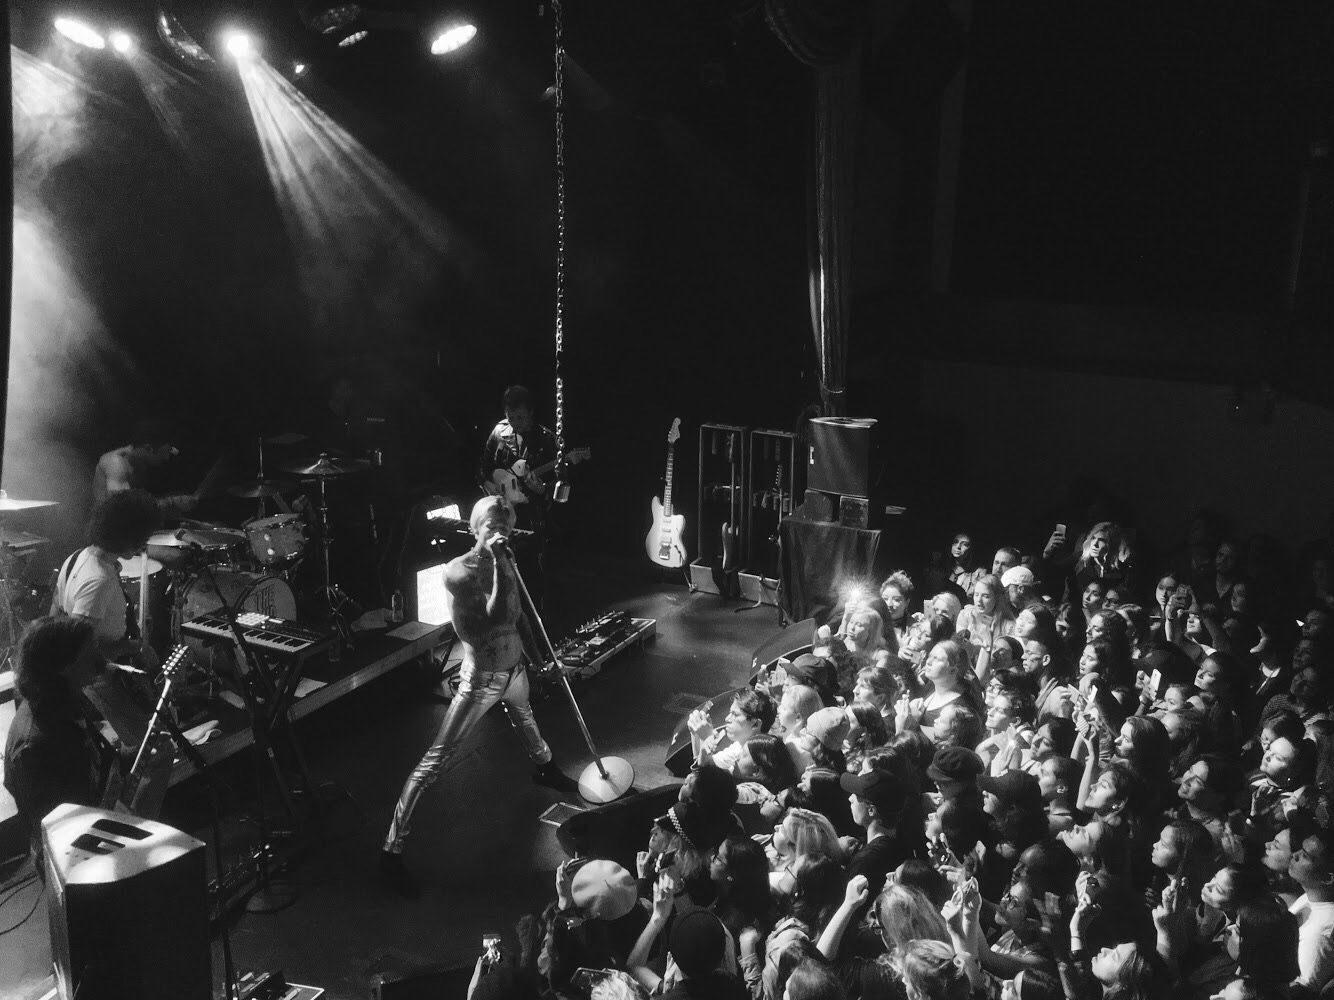 The Neighbourhood played a sold out concert at Terminal 5 on Wednesday, led by their ever shirtless lead Jesse Rutherford.